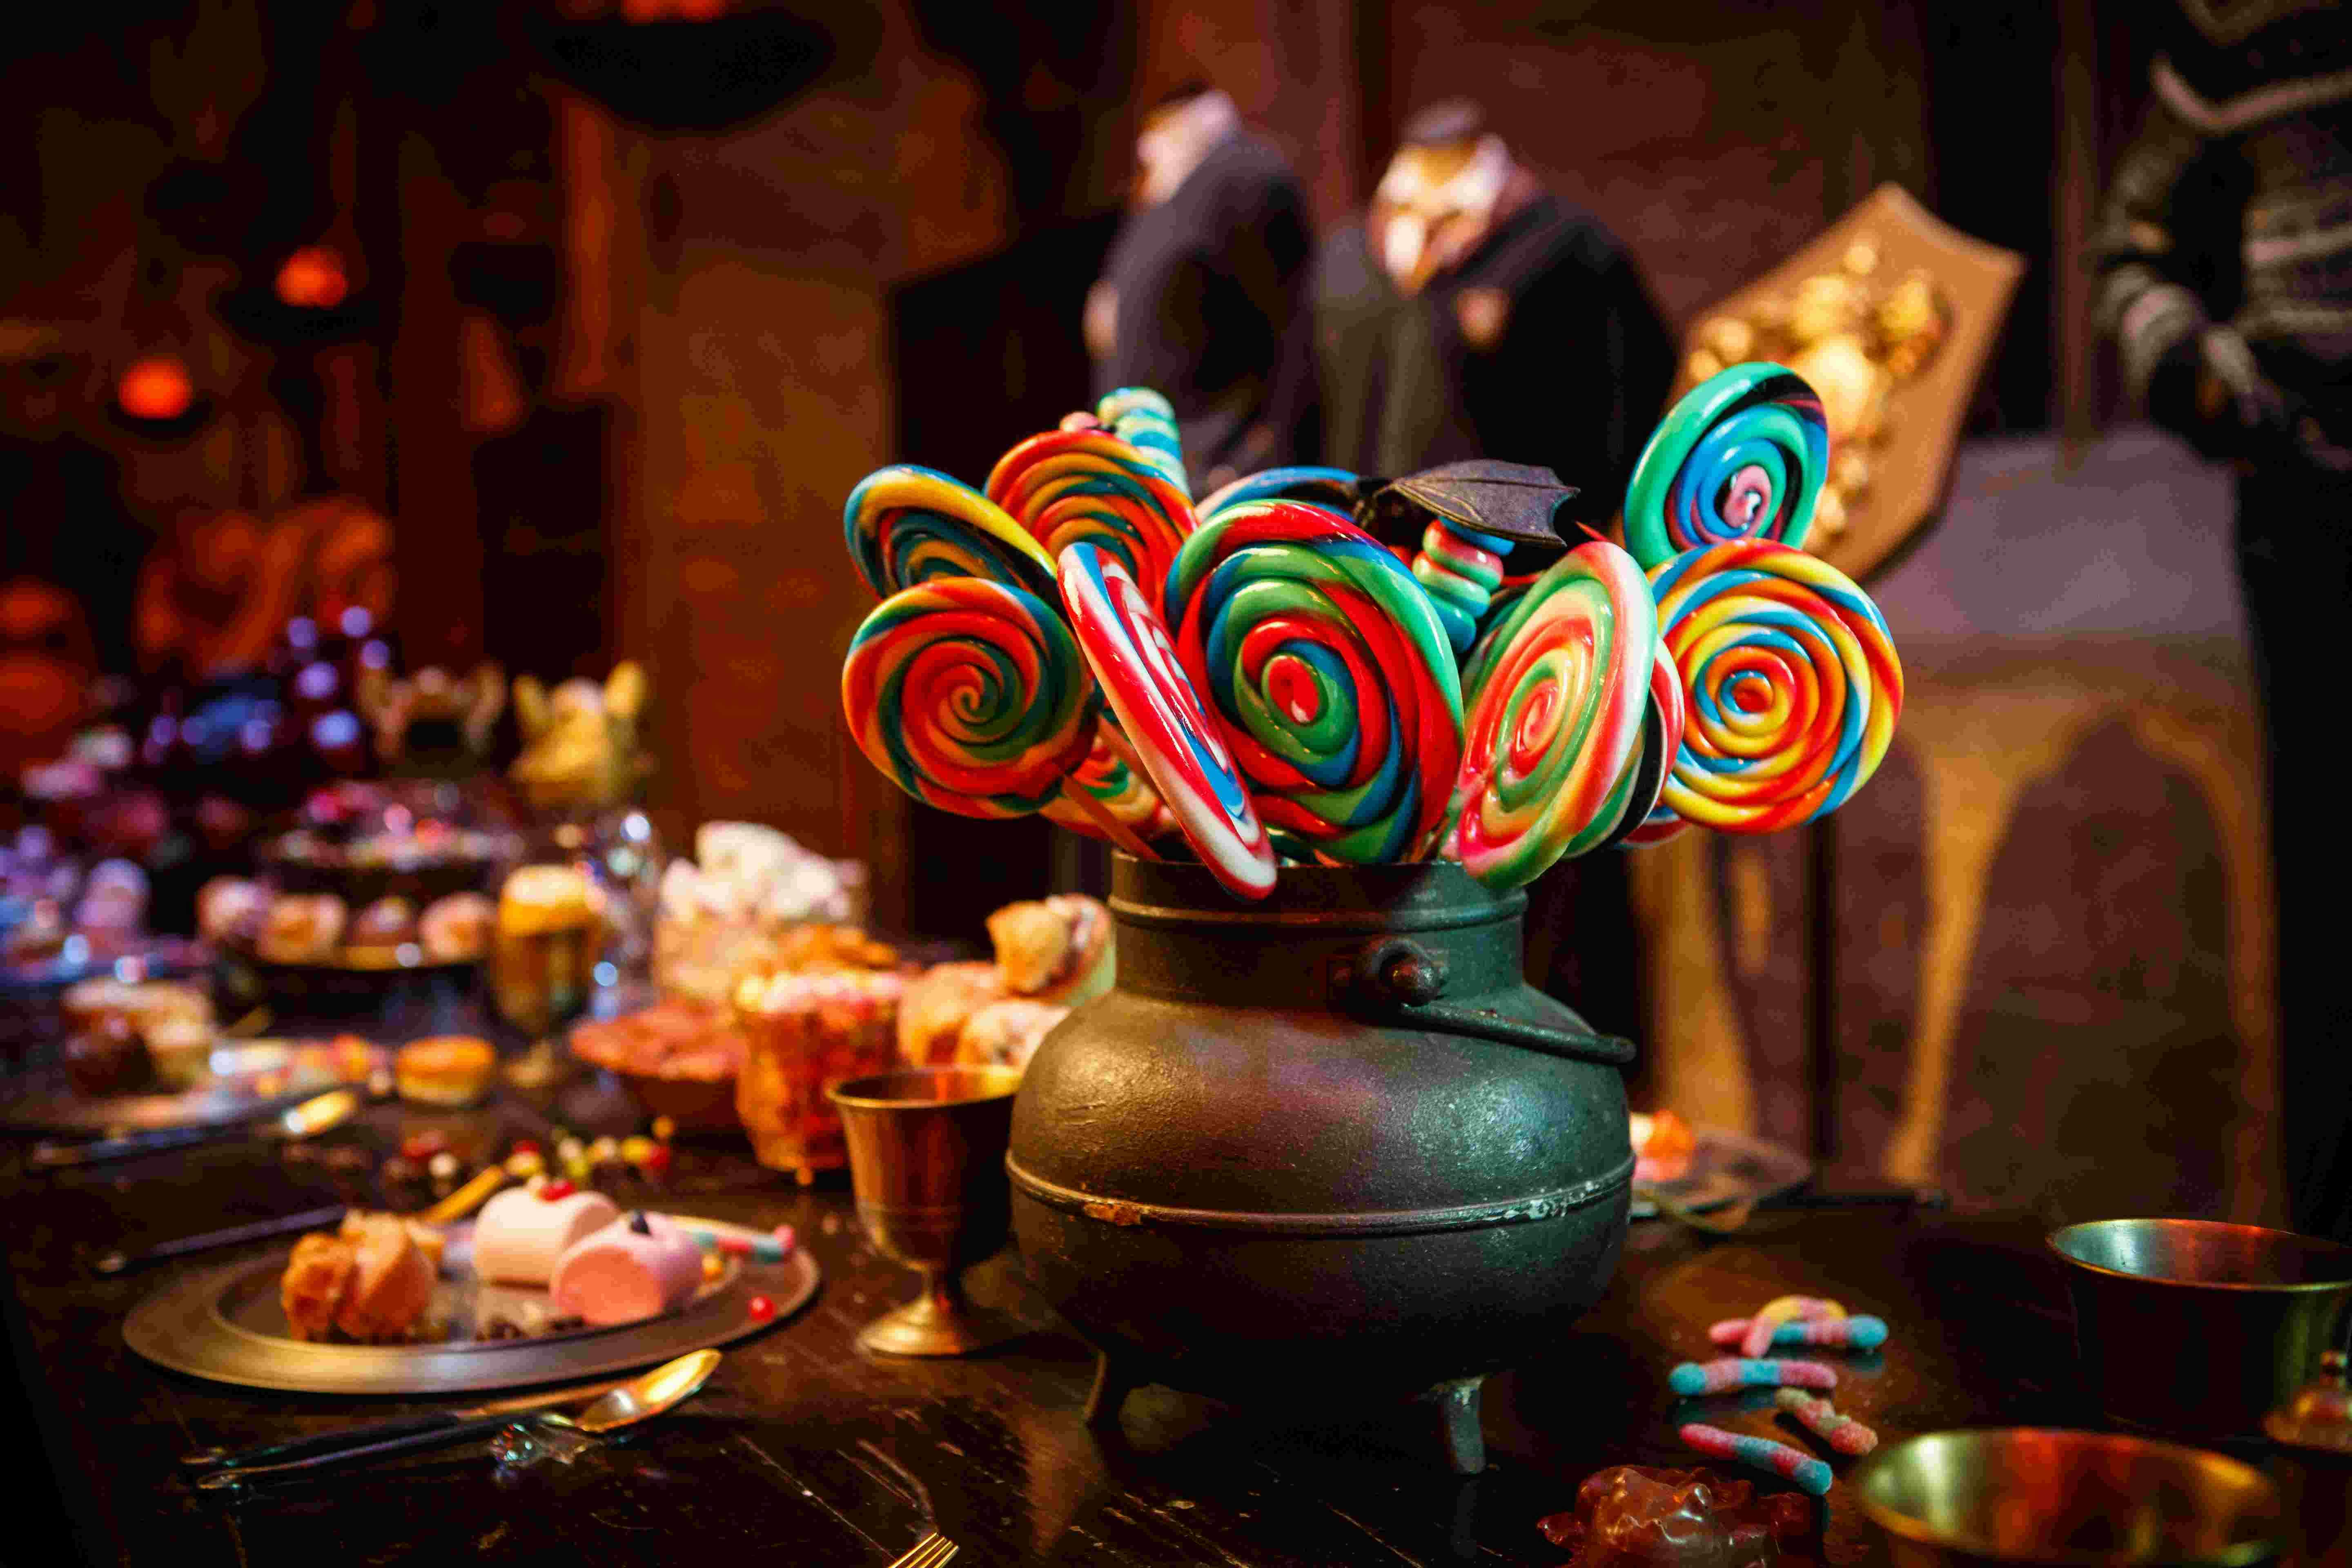 Dark Arts - Food and Sweets table